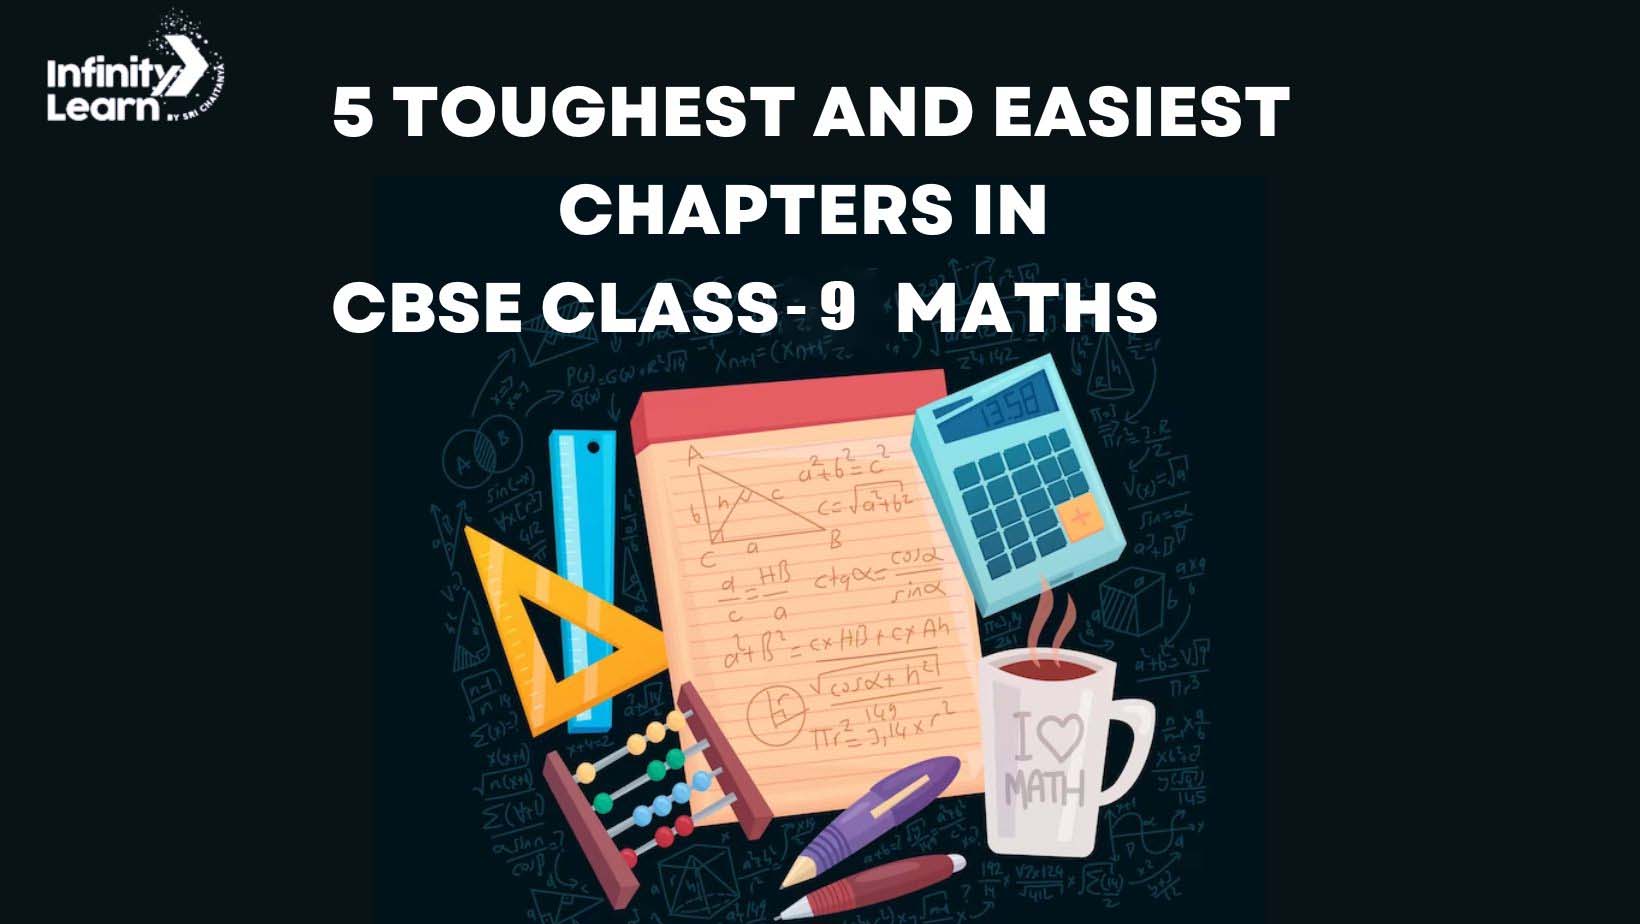 5 Toughest and Easiest Chapters in CBSE Class 9 Maths